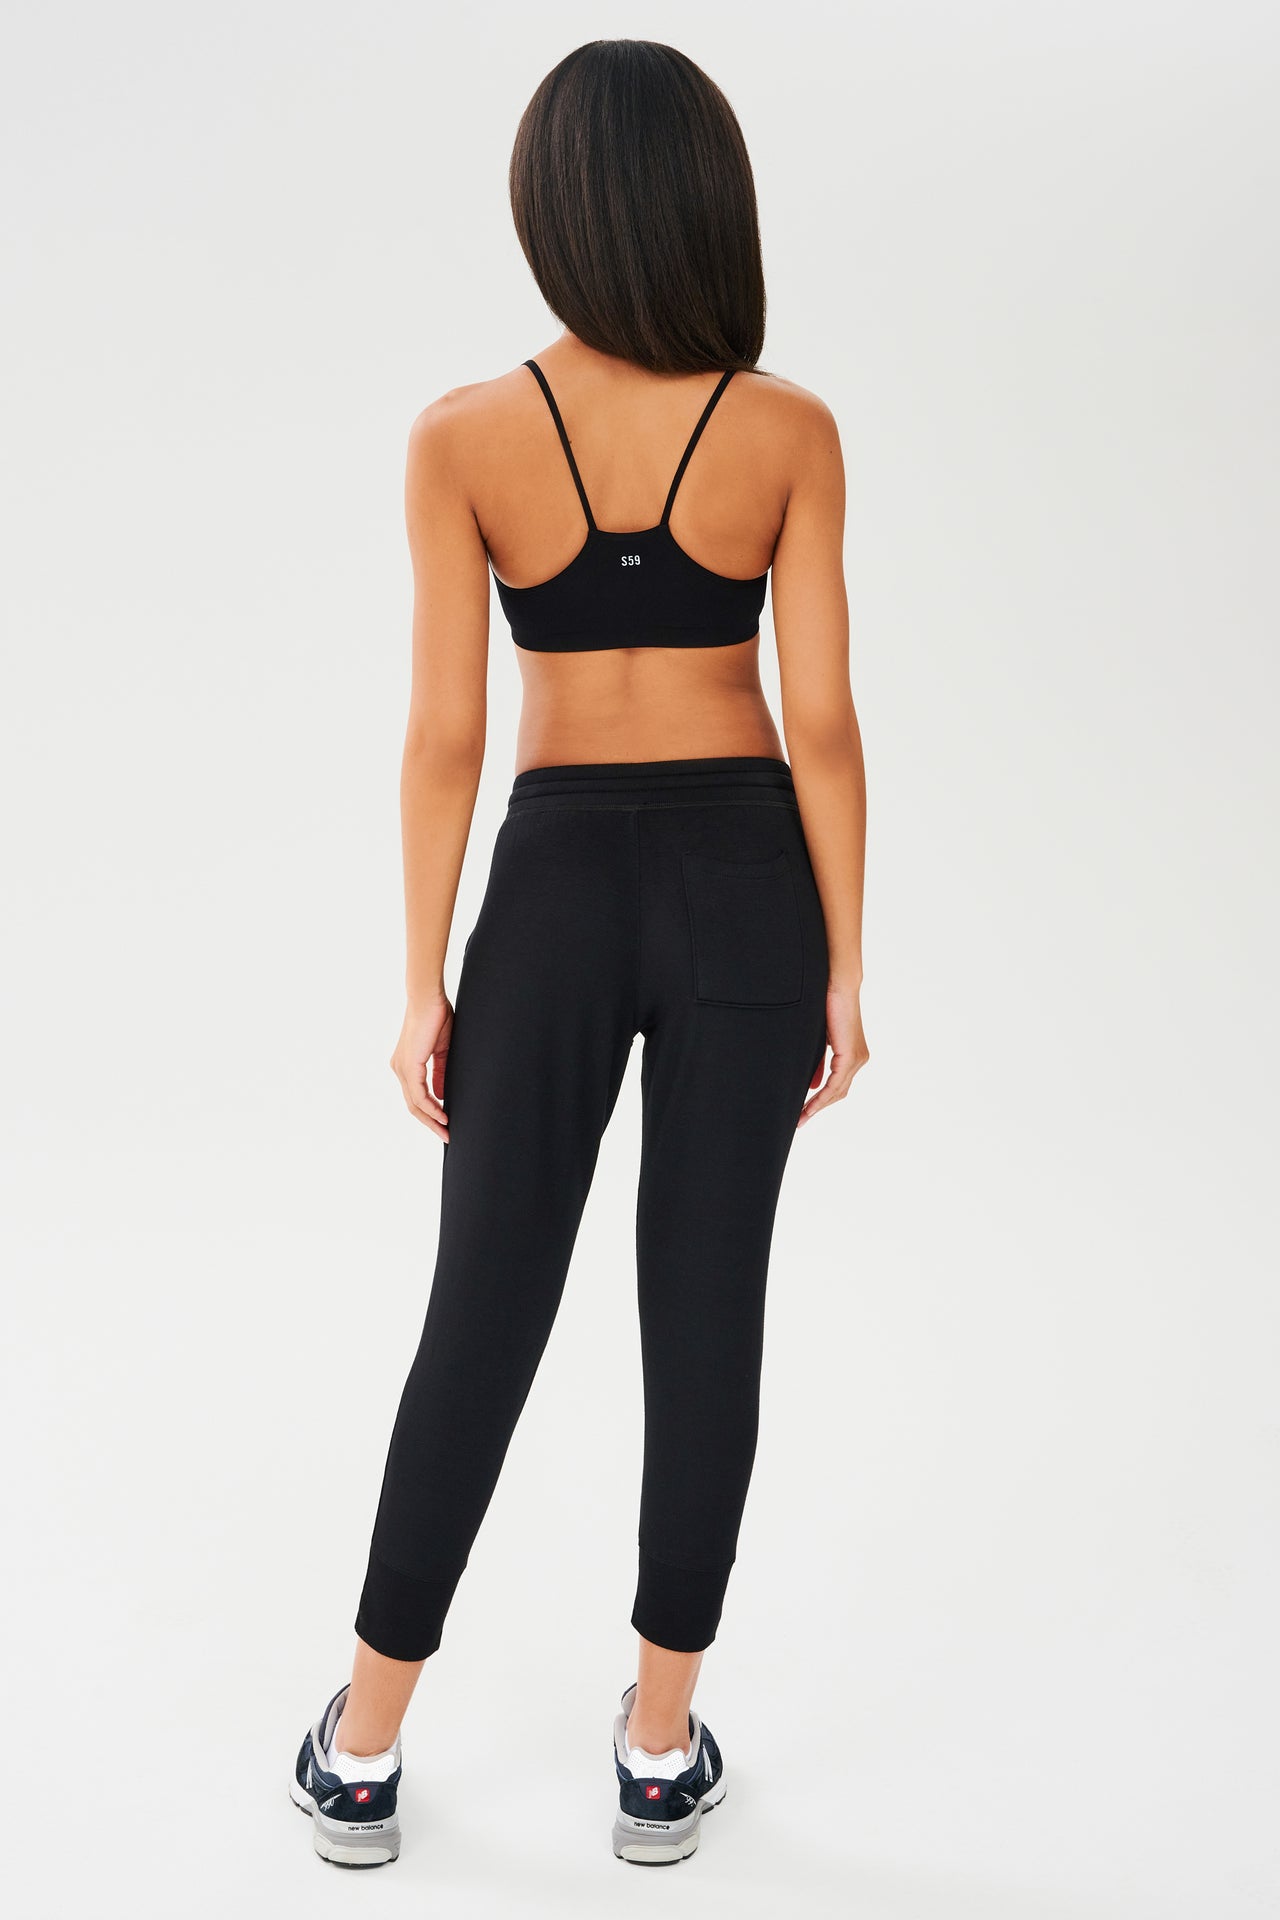 The back view of a woman wearing black, chafe-free fabric leggings and a Splits59 Loren Seamless Bra - Black at the gym.